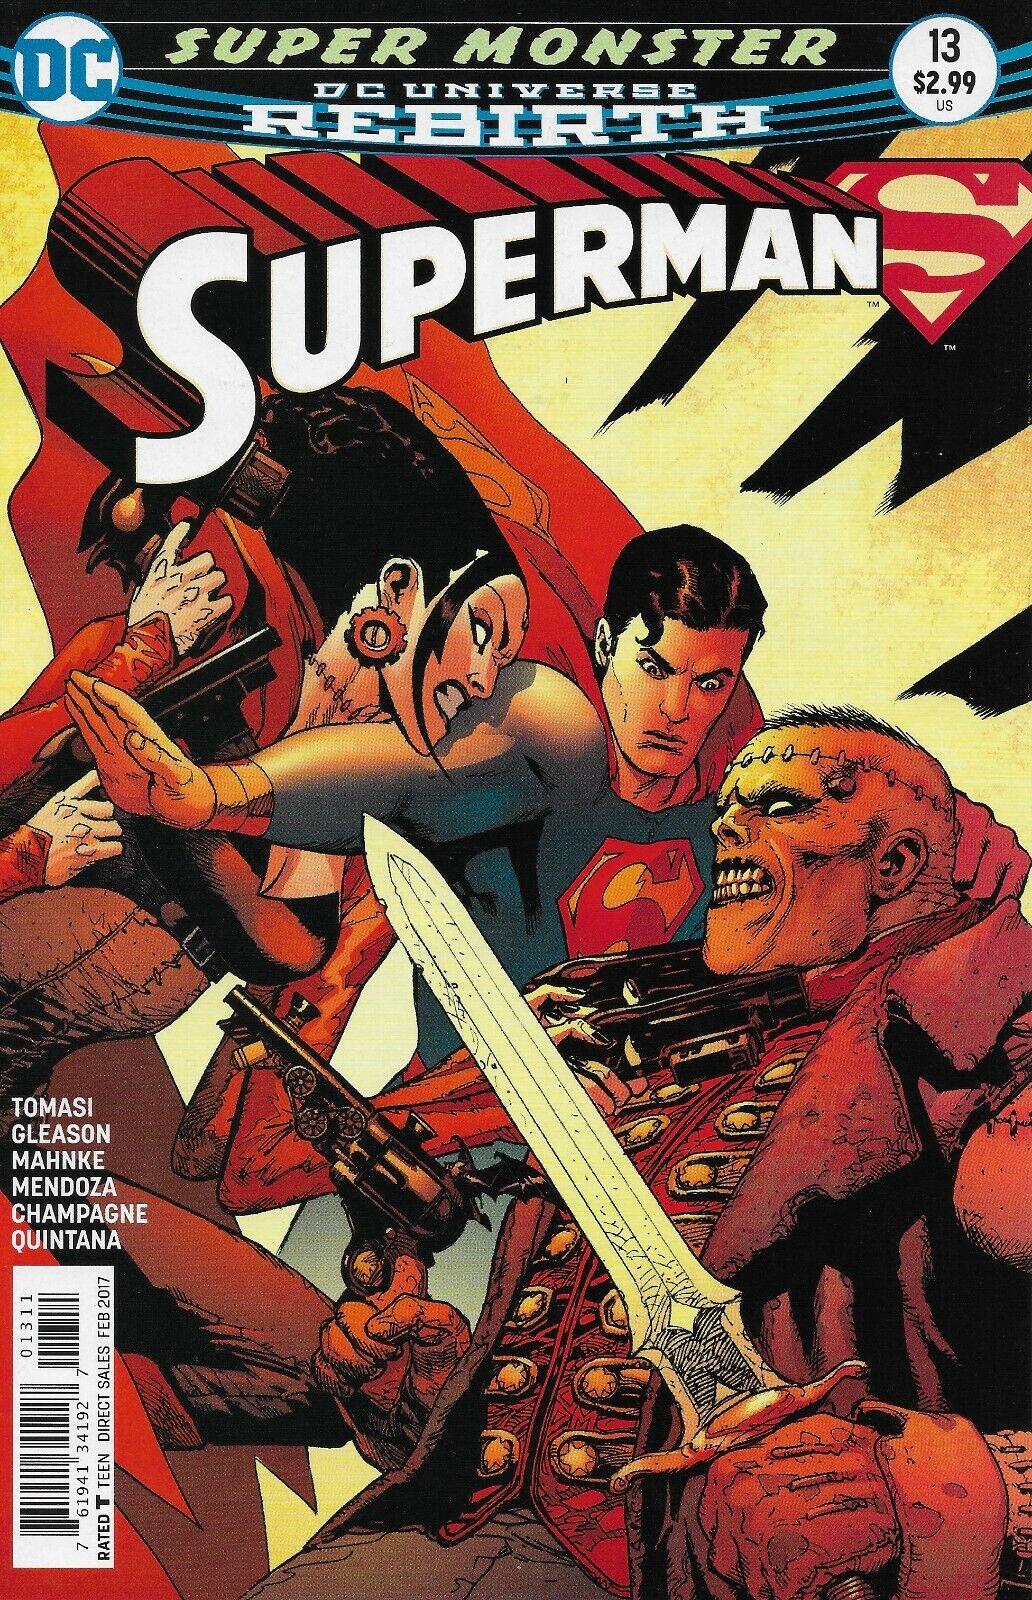 SUPERMAN #13 DC COMICS 2017 BAGGED AND BOARDED